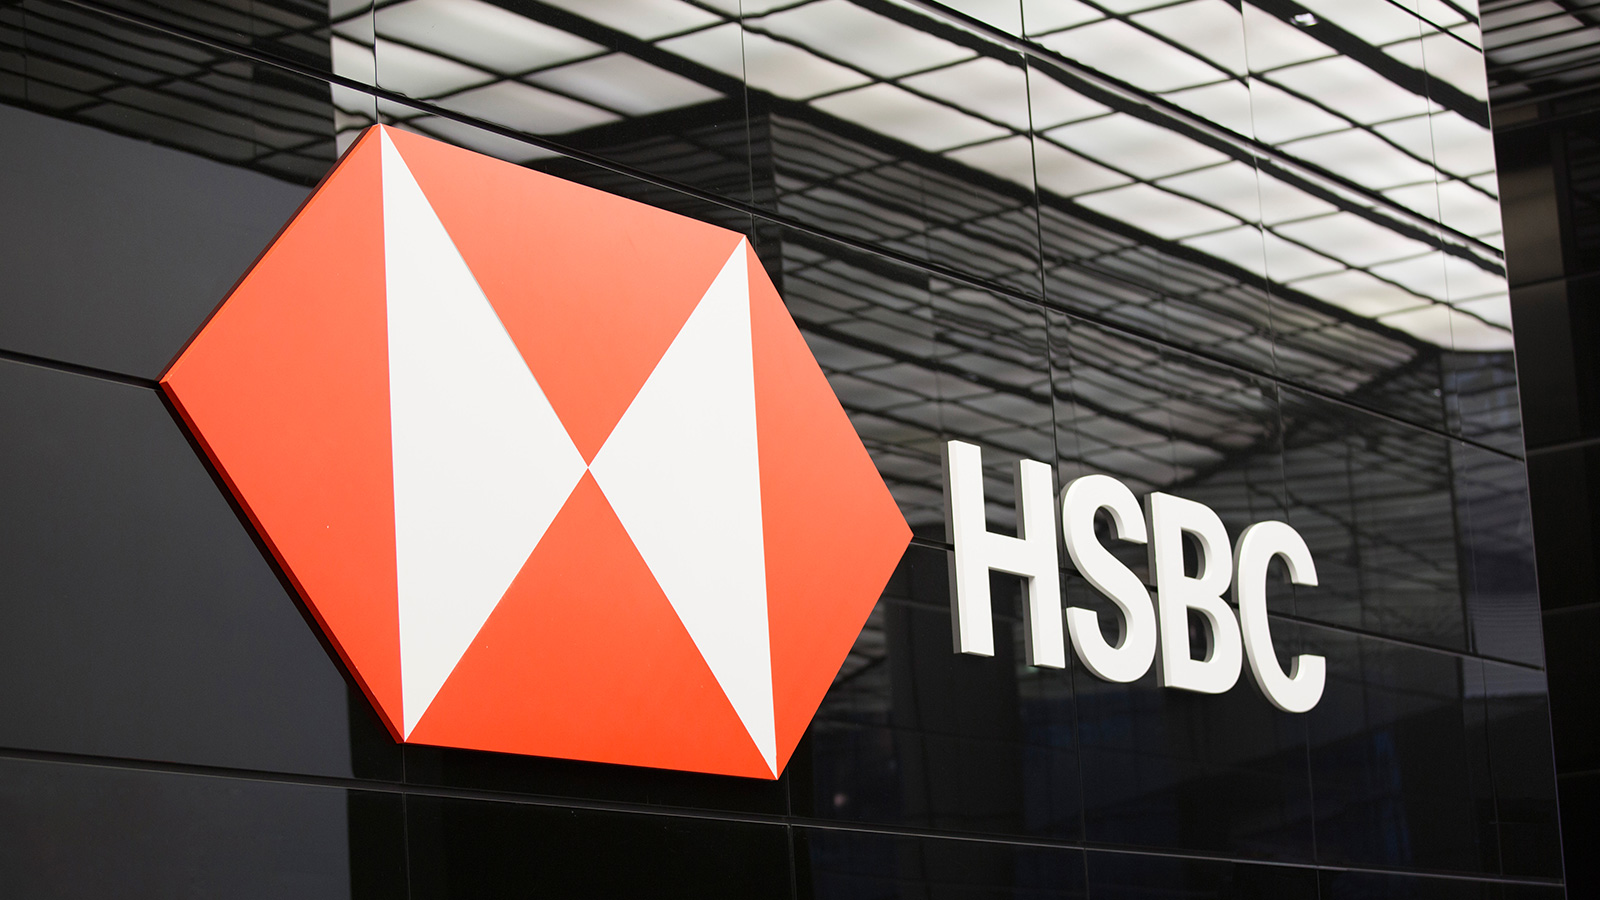 HSBC Managers to Hot Desk Instead of Having Private Offices